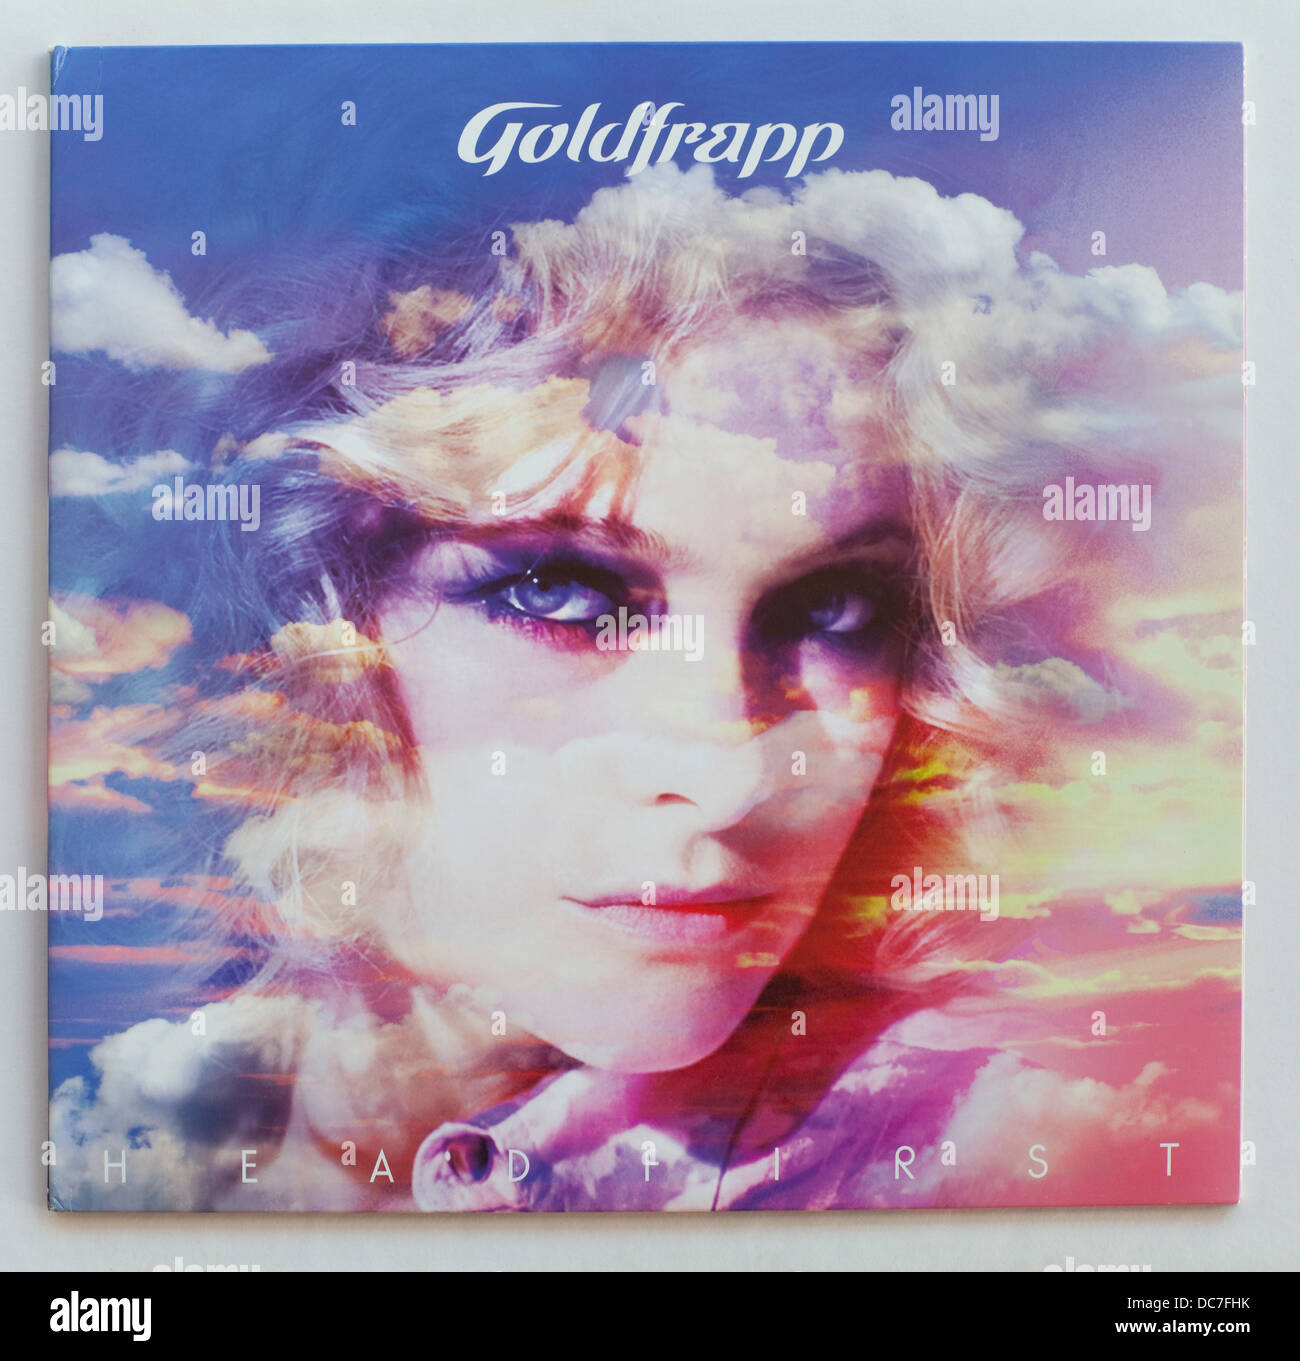 Goldfrapp - Head First, 2010 album on Mute Corporation - Editorial use only Stock Photo